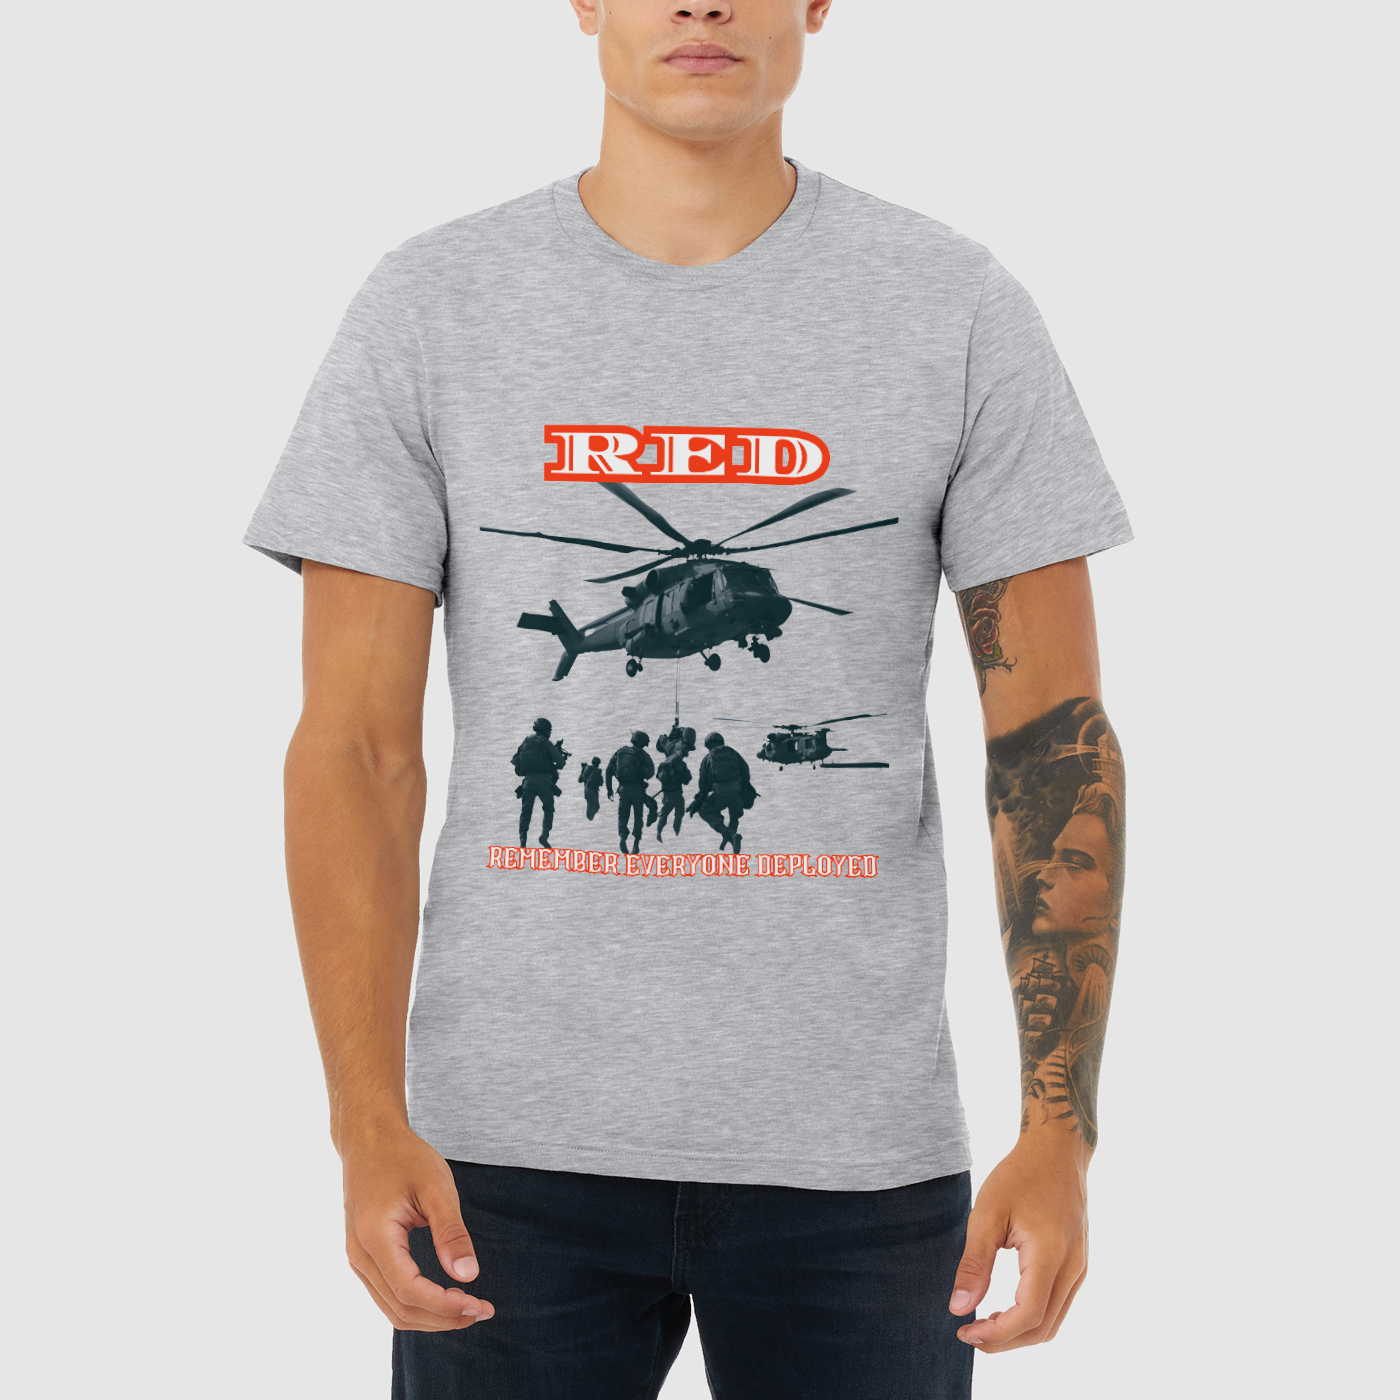 Deployed RED Mens Crew Tee, Bella + Canvas